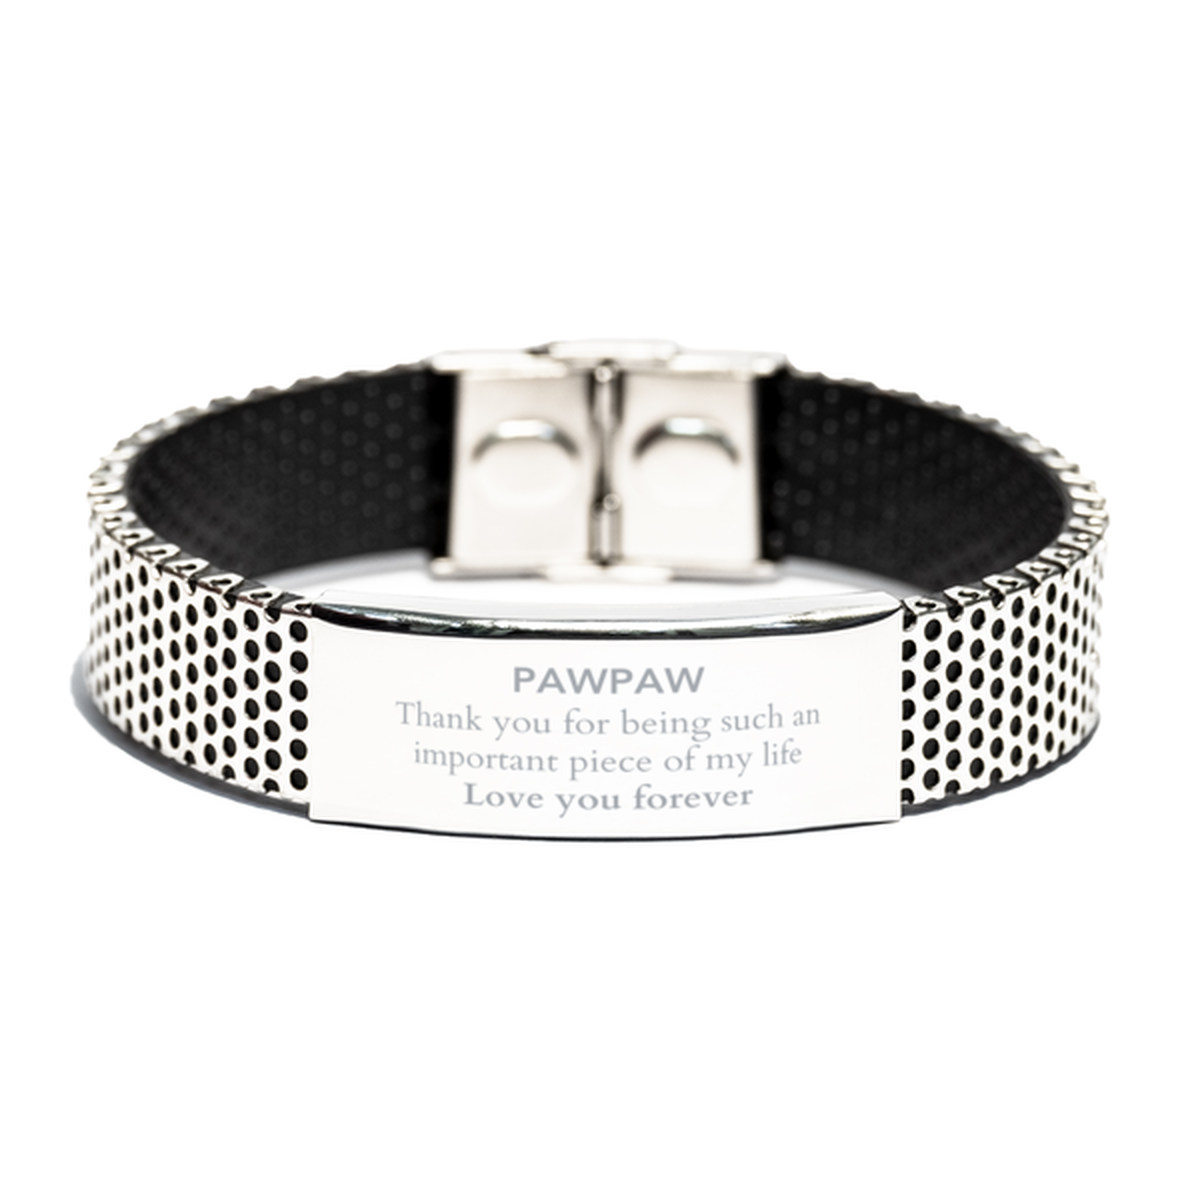 Appropriate Pawpaw Stainless Steel Bracelet Epic Birthday Gifts for Pawpaw Thank you for being such an important piece of my life Pawpaw Christmas Mothers Fathers Day